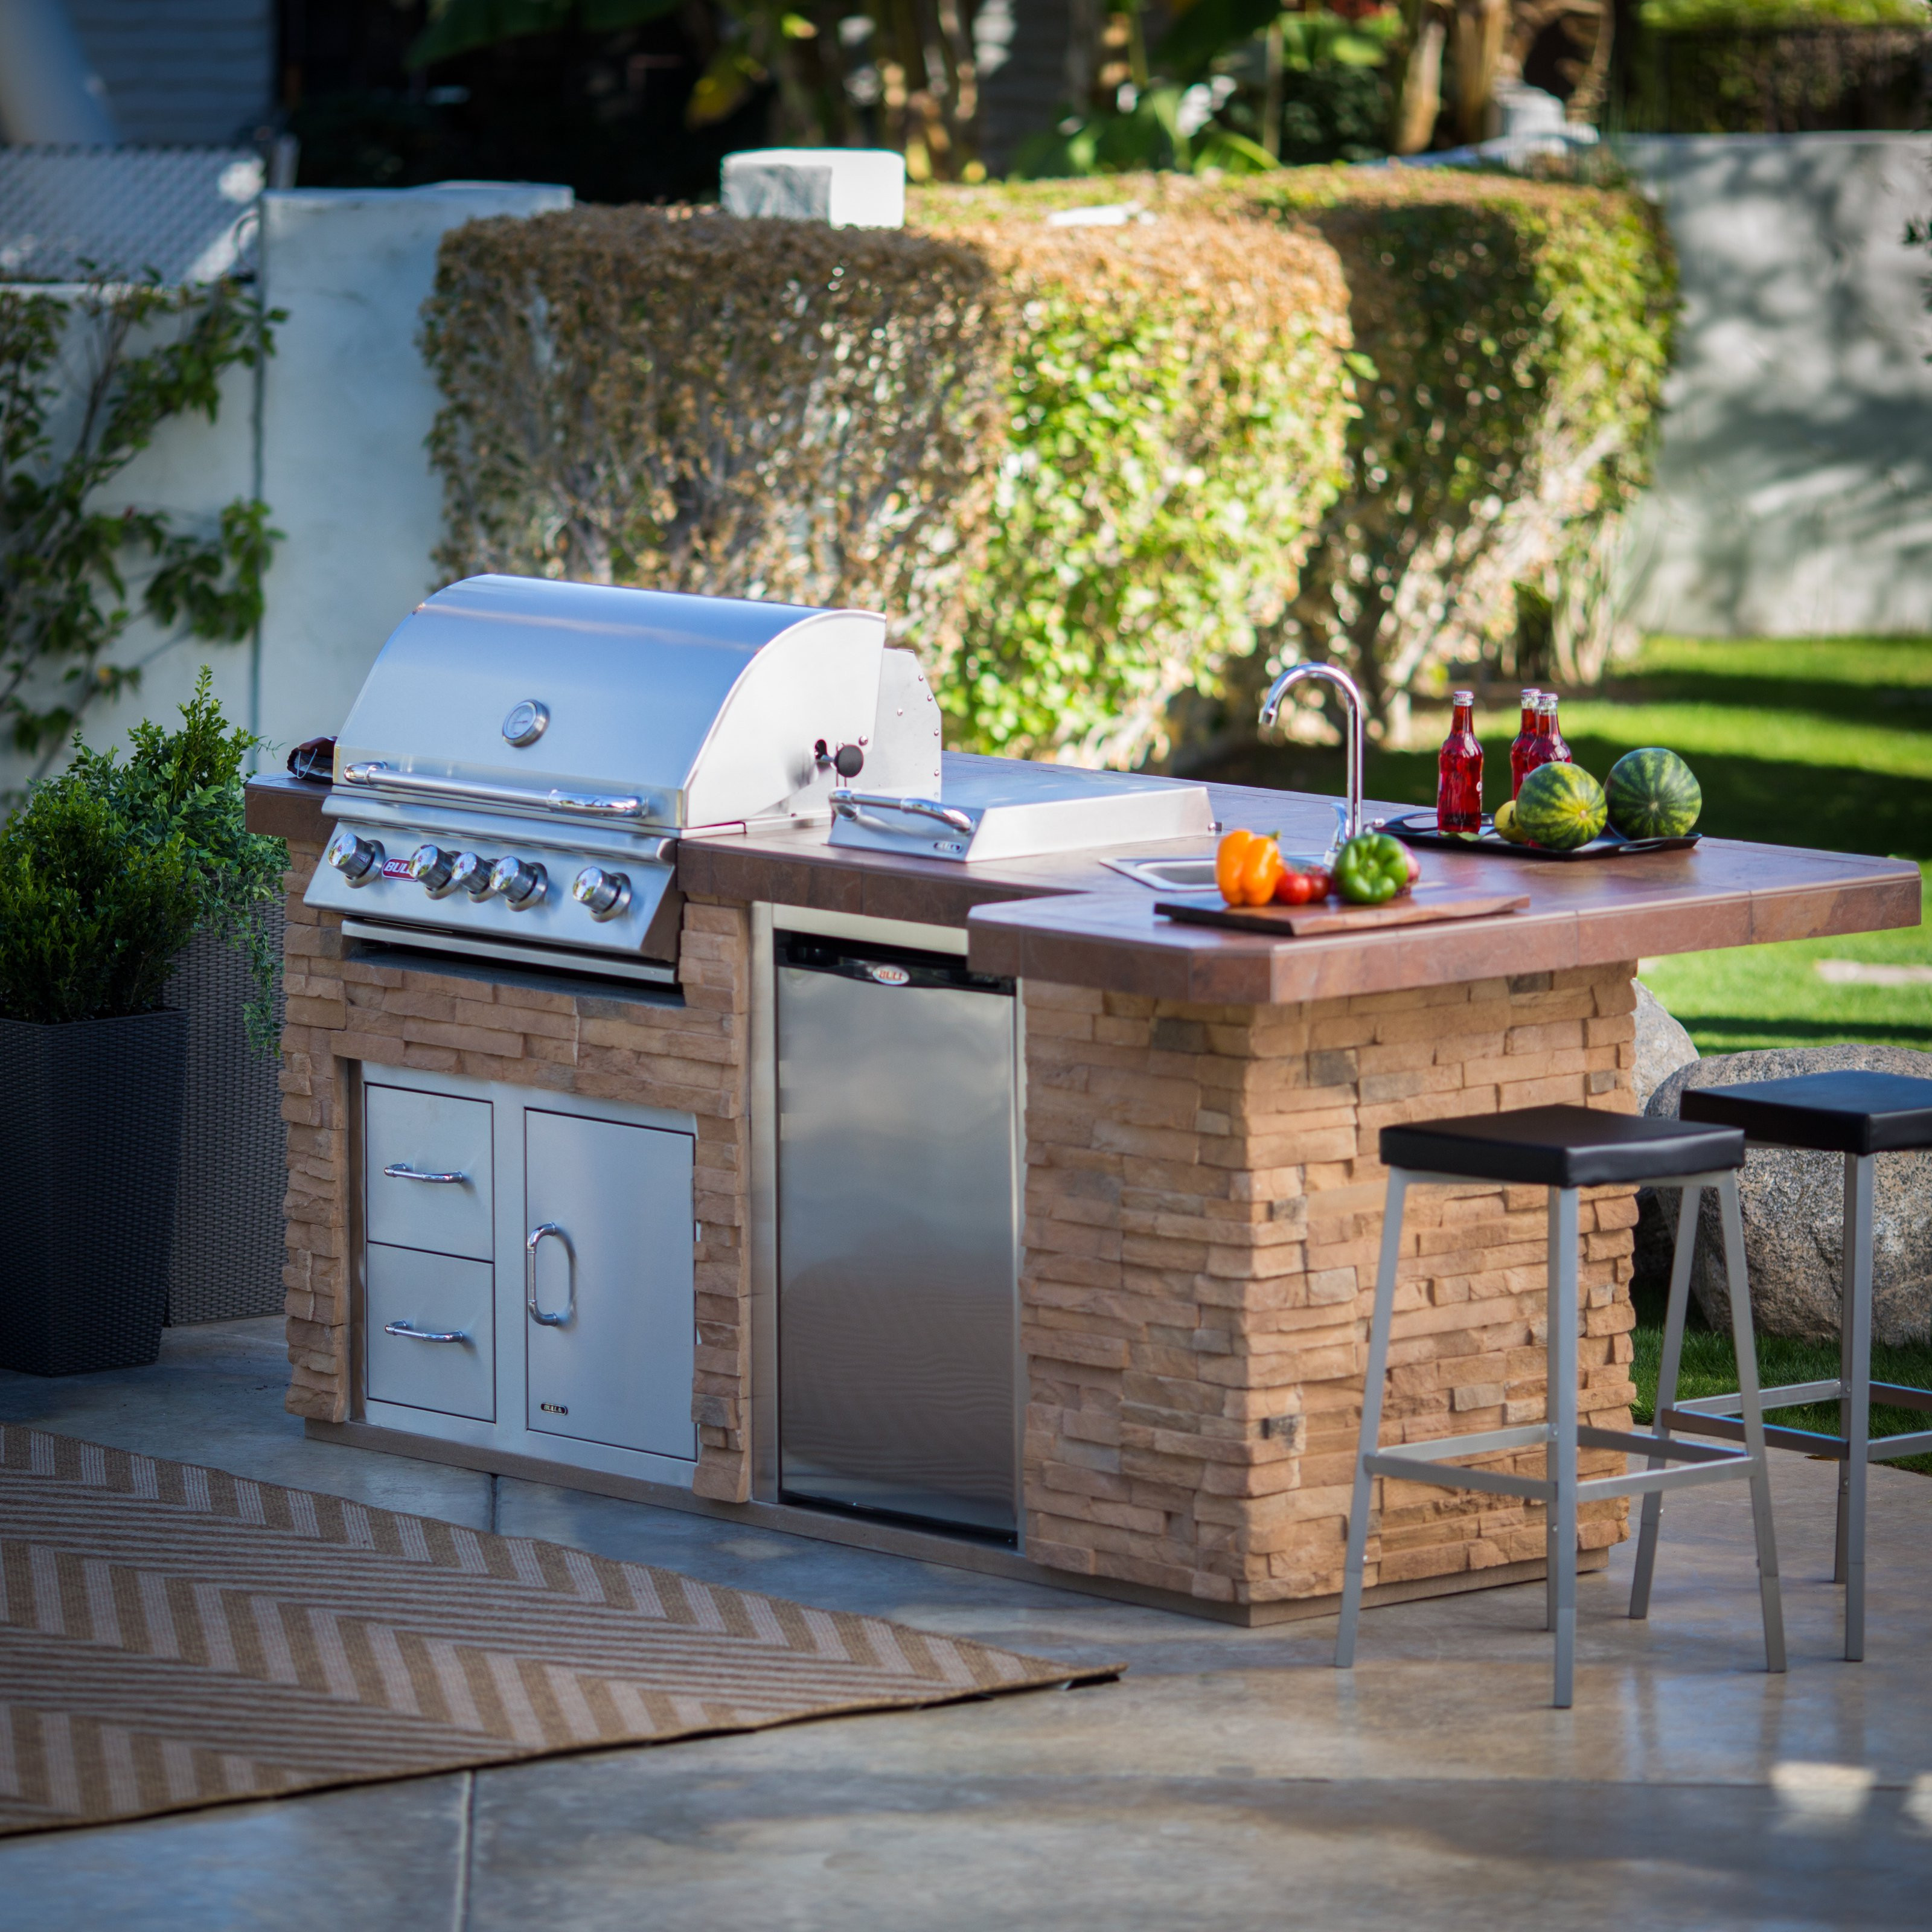 Outdoor Kitchen Islands
 Bull BBQ Grill Island Outdoor Kitchens at Hayneedle